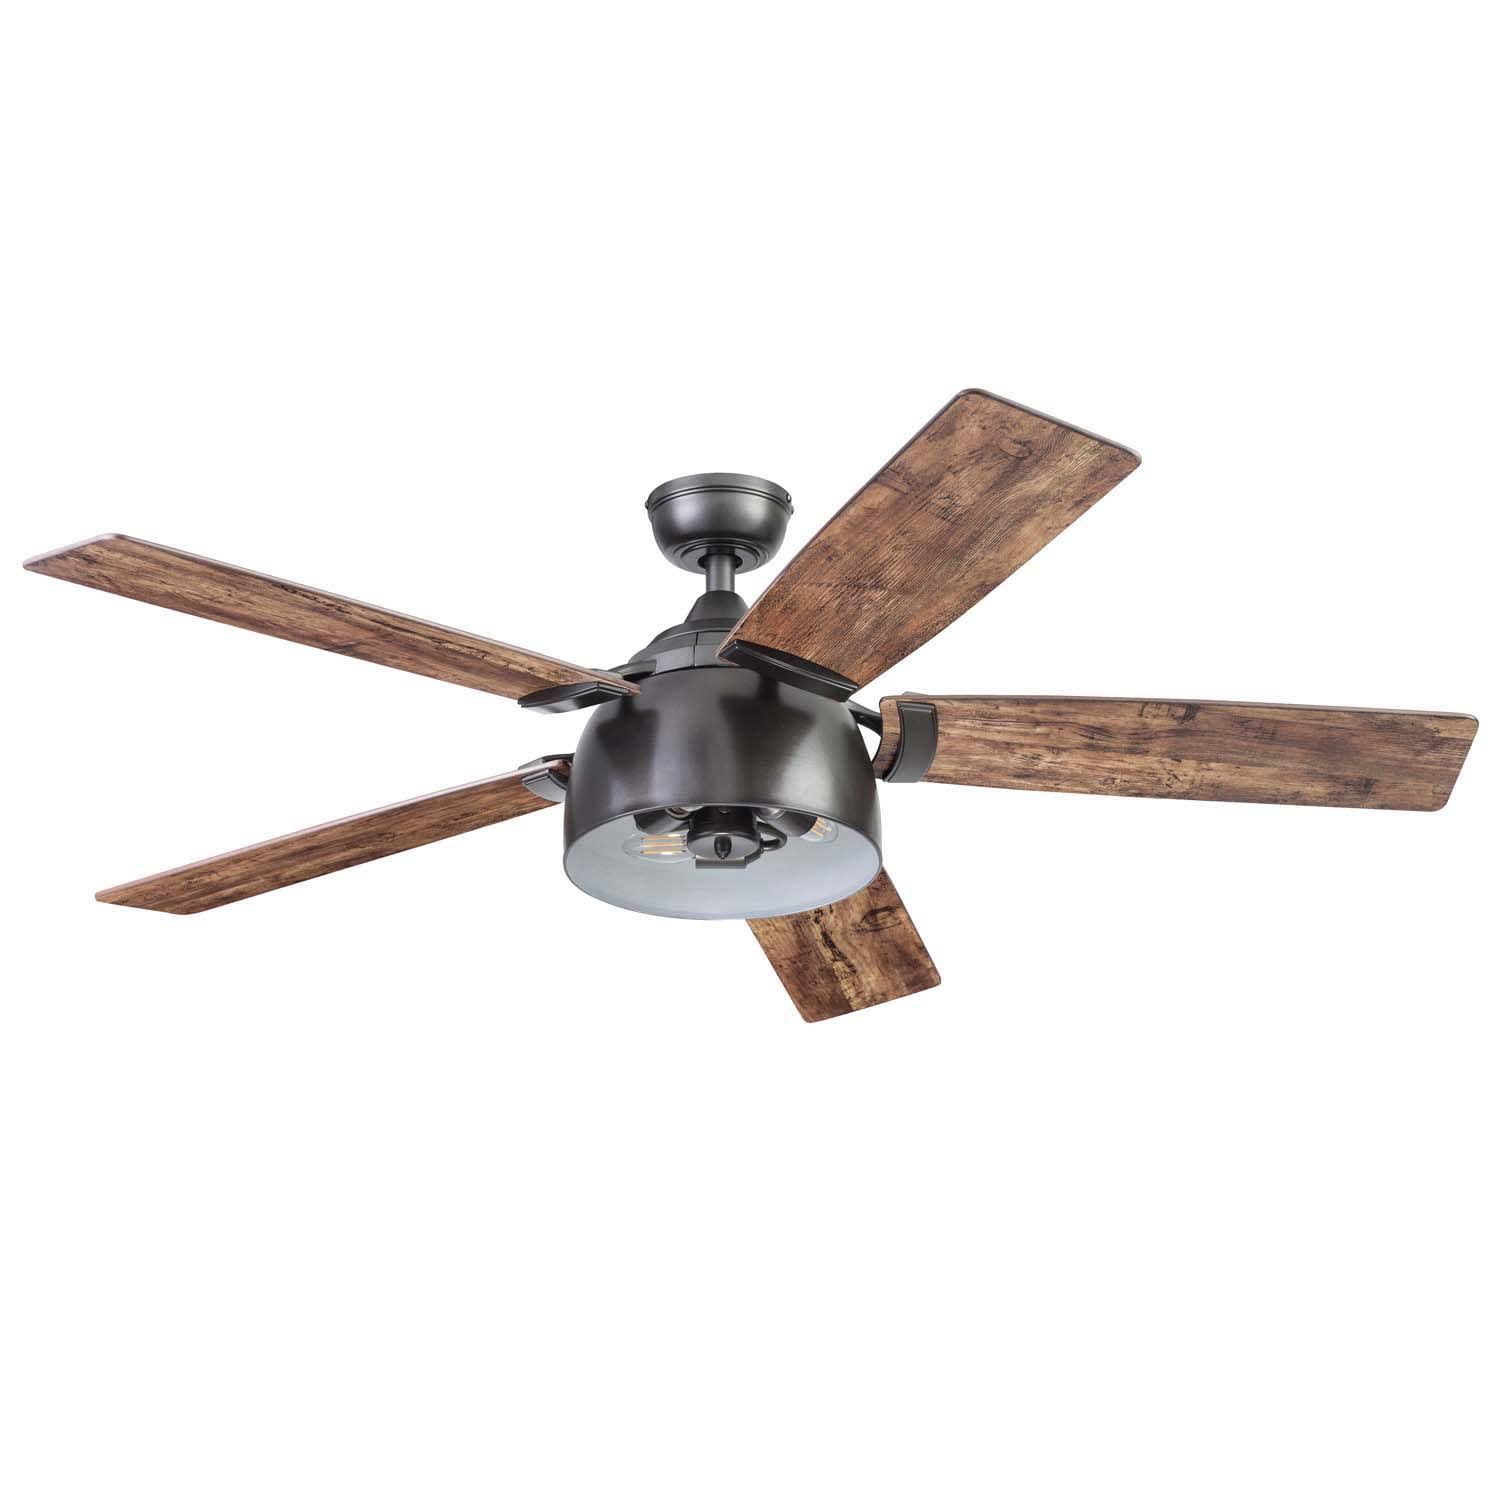 Prominence Home 51480-01 Octavia Ceiling Fan, 52, Iron